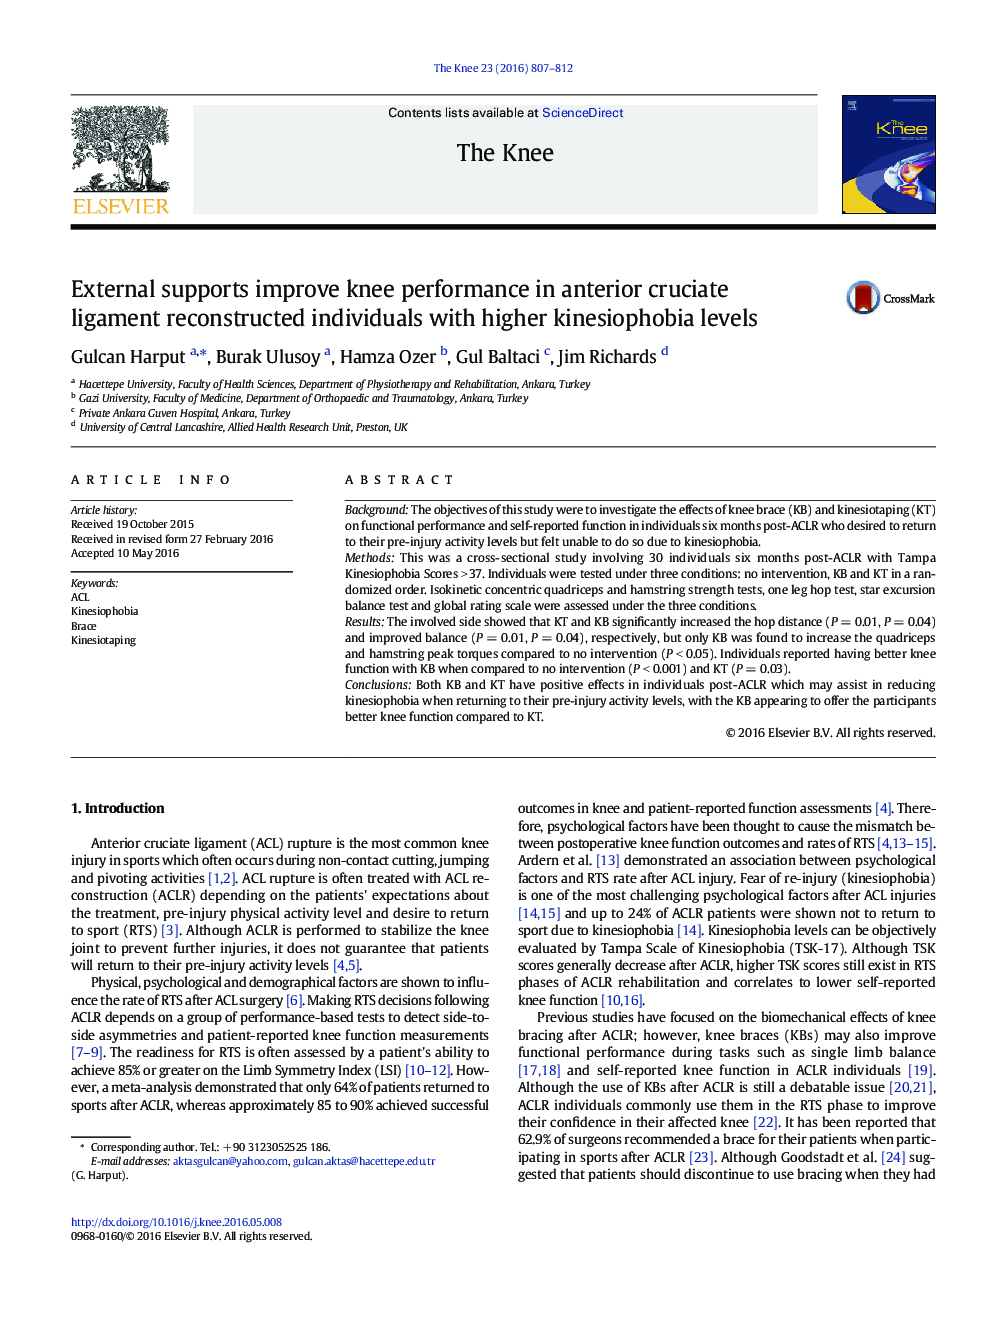 External supports improve knee performance in anterior cruciate ligament reconstructed individuals with higher kinesiophobia levels